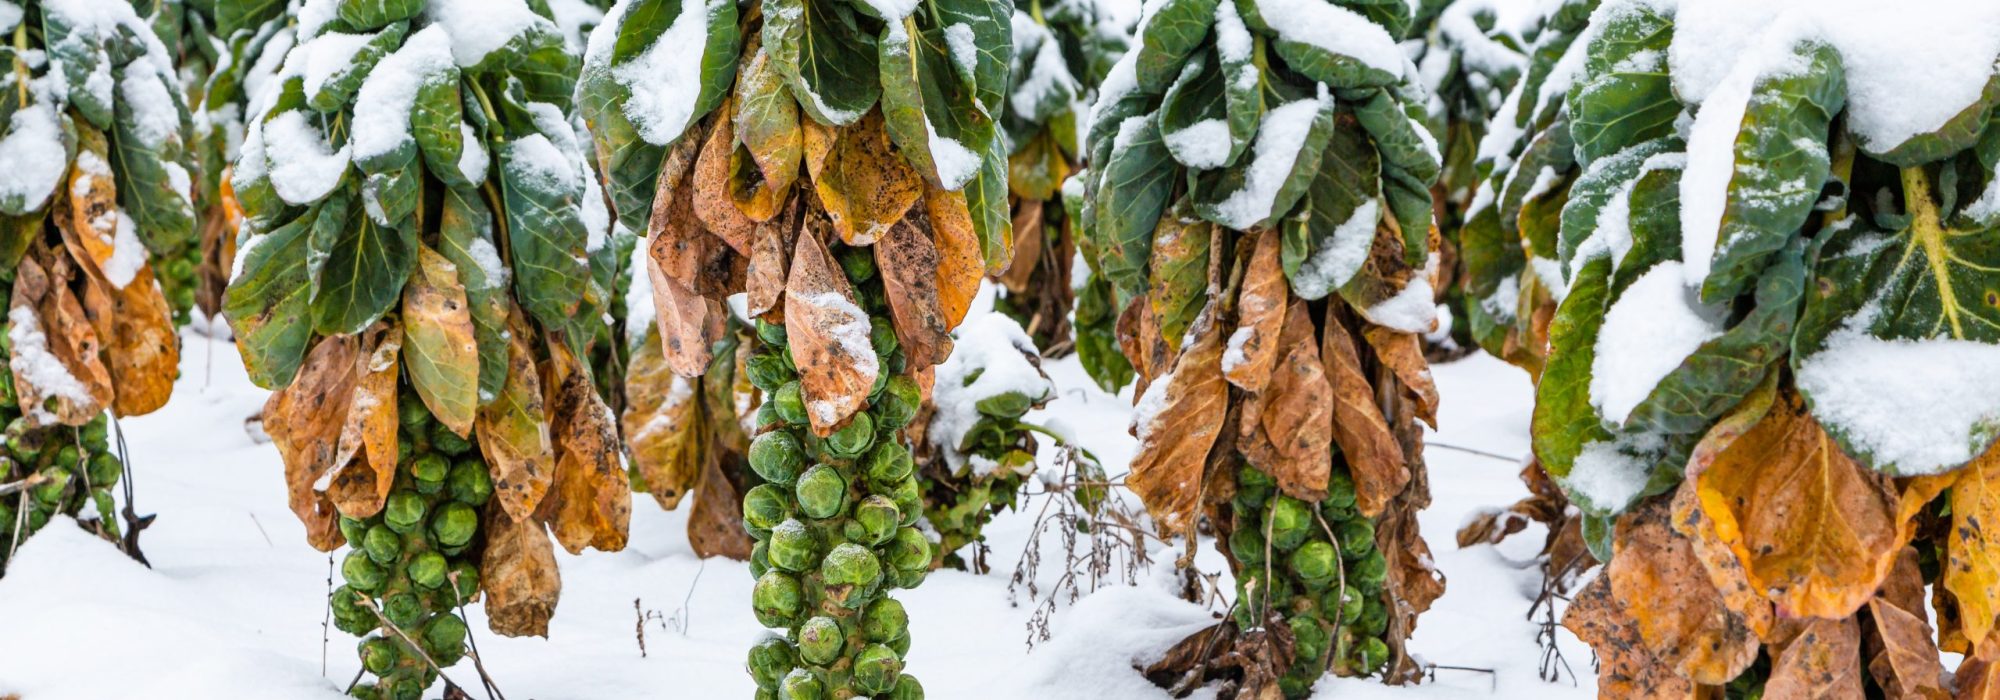 Snow,Covered,Brussels,Sprouts,On,A,Field,In,Winter